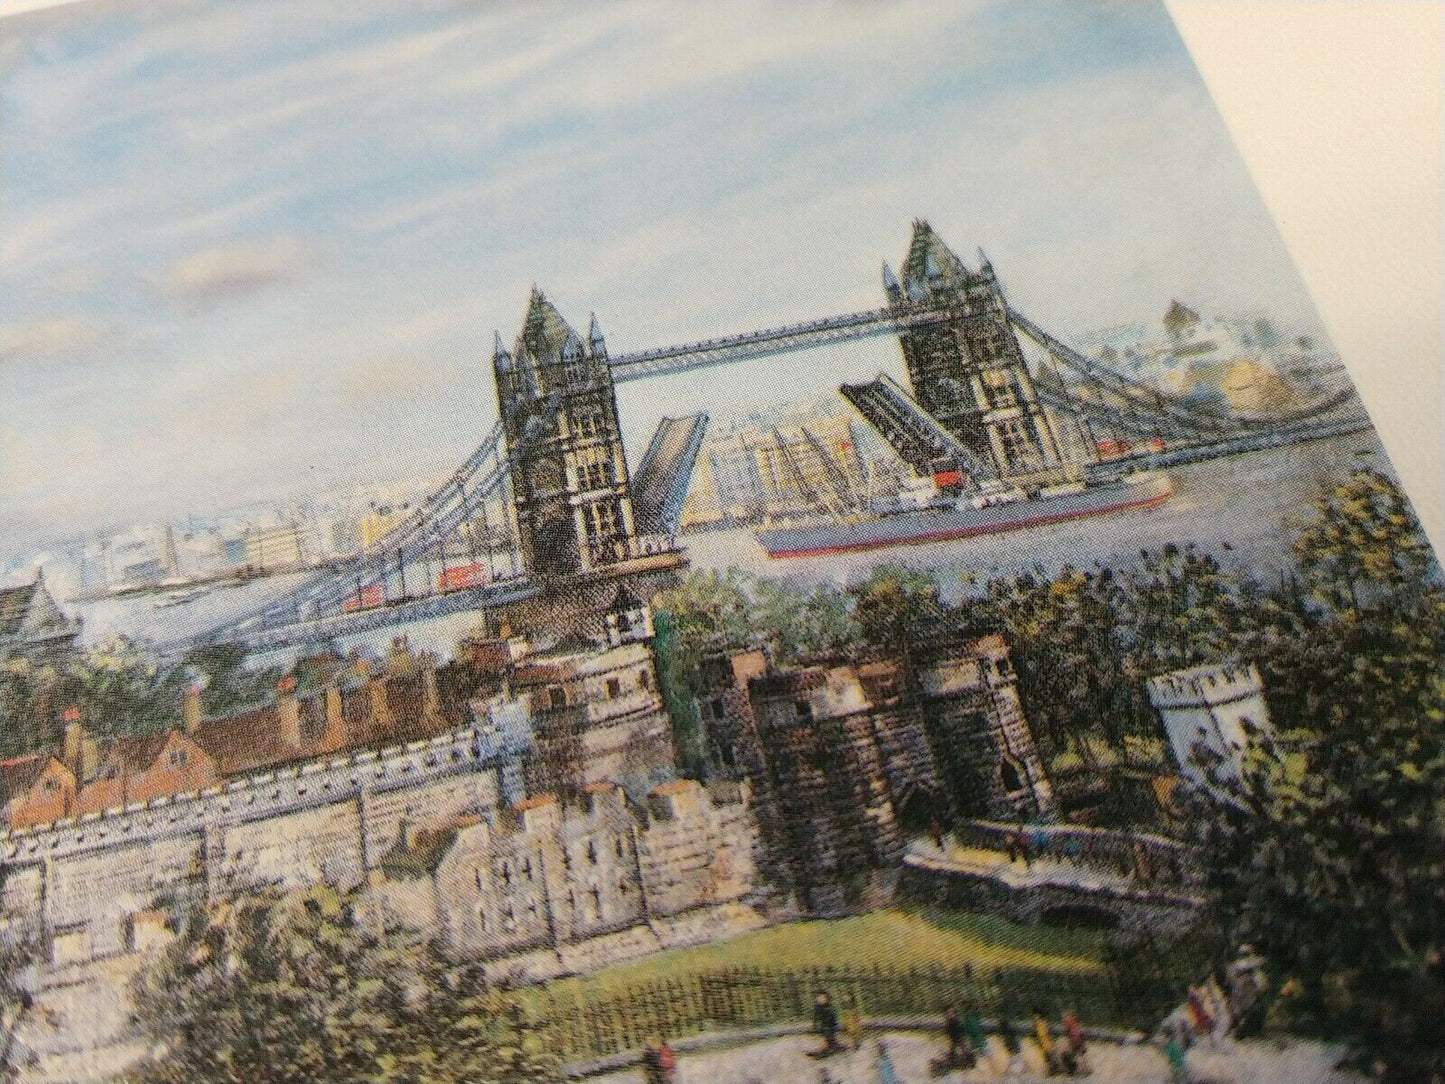 The Towel and Towel Bridge - London - Lithograph 1981 - H Moss